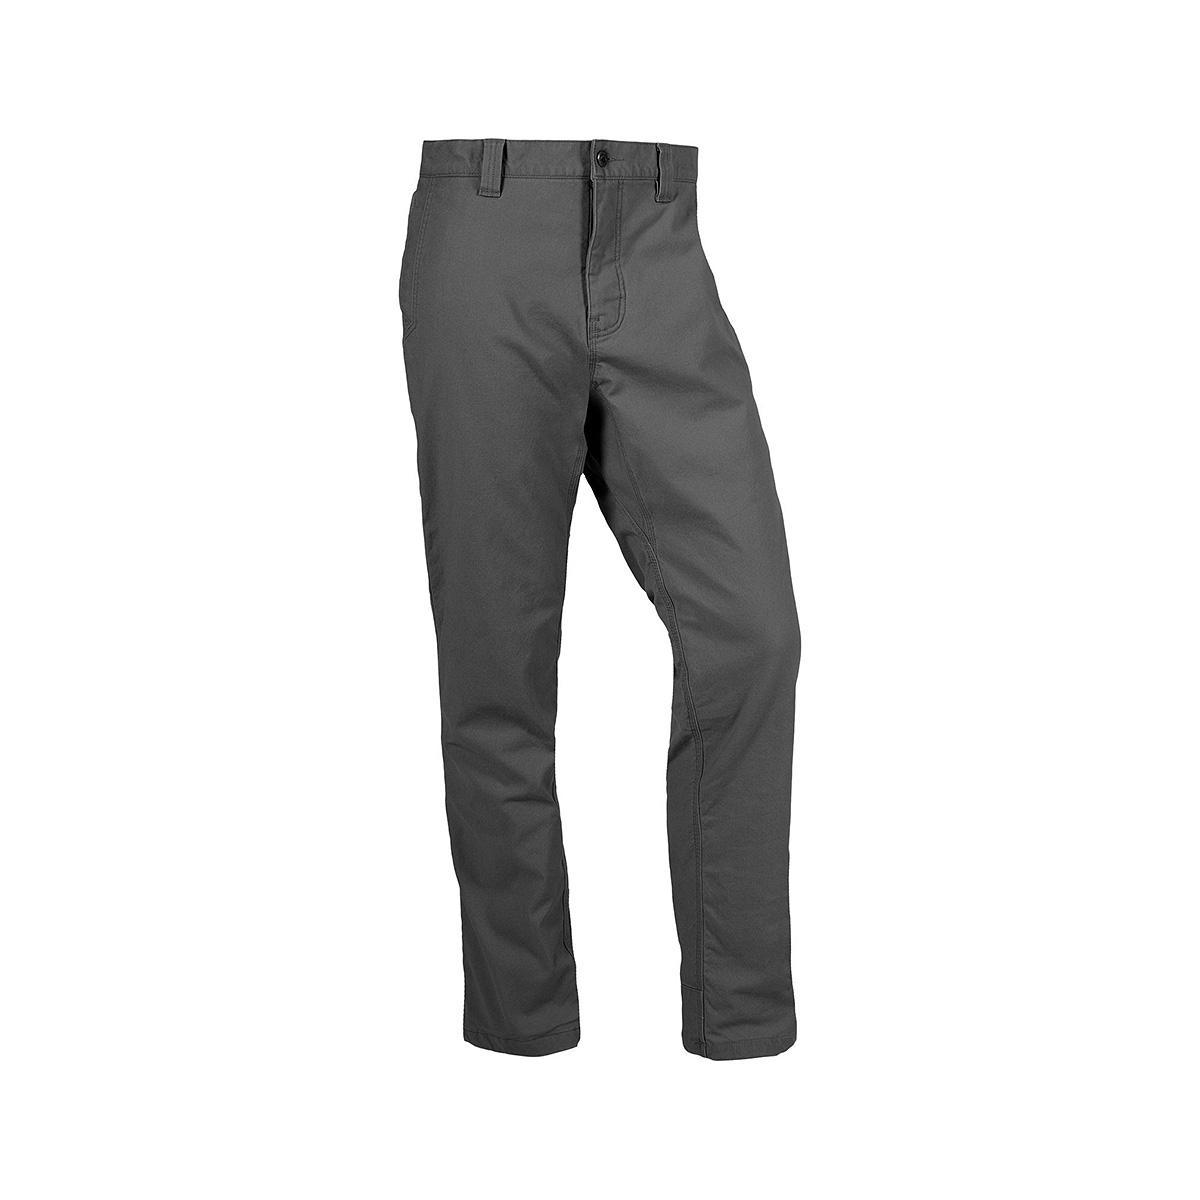 Women's Cargo Pants for sale in Guilford Hills